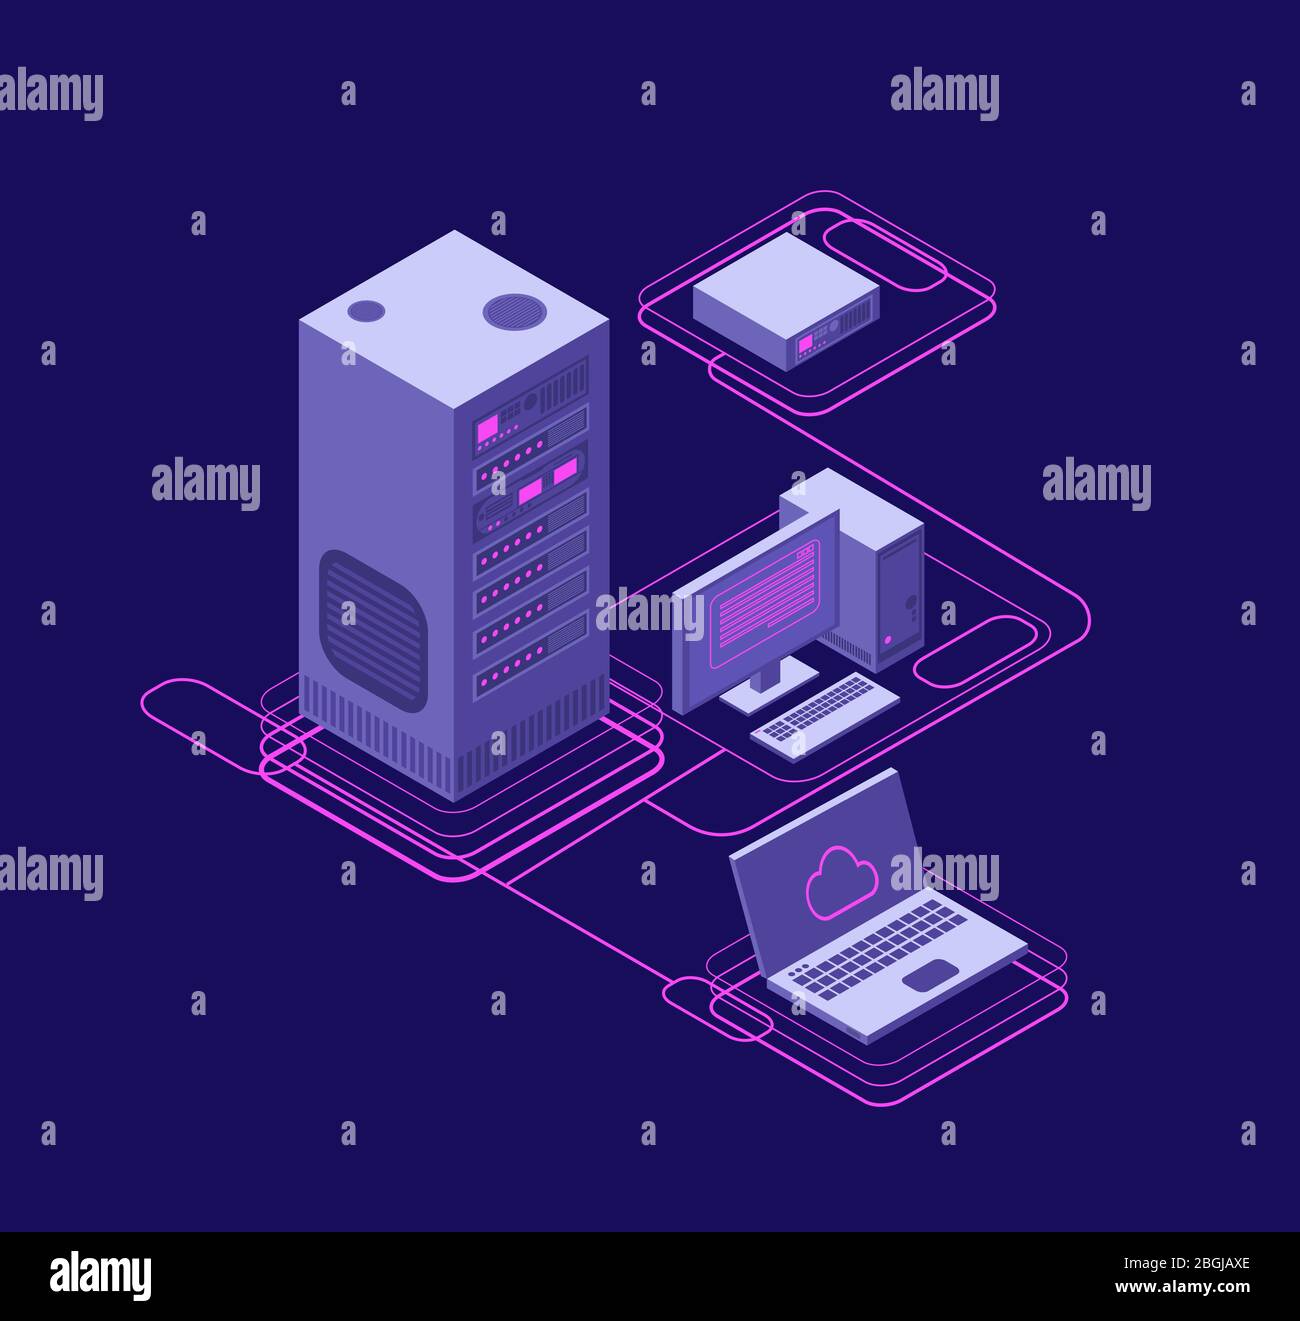 Computer synchronization, data network management. Isometric devices, networking servers. Cloud storage technology vector concept. Process database communication in hosting illustration Stock Vector